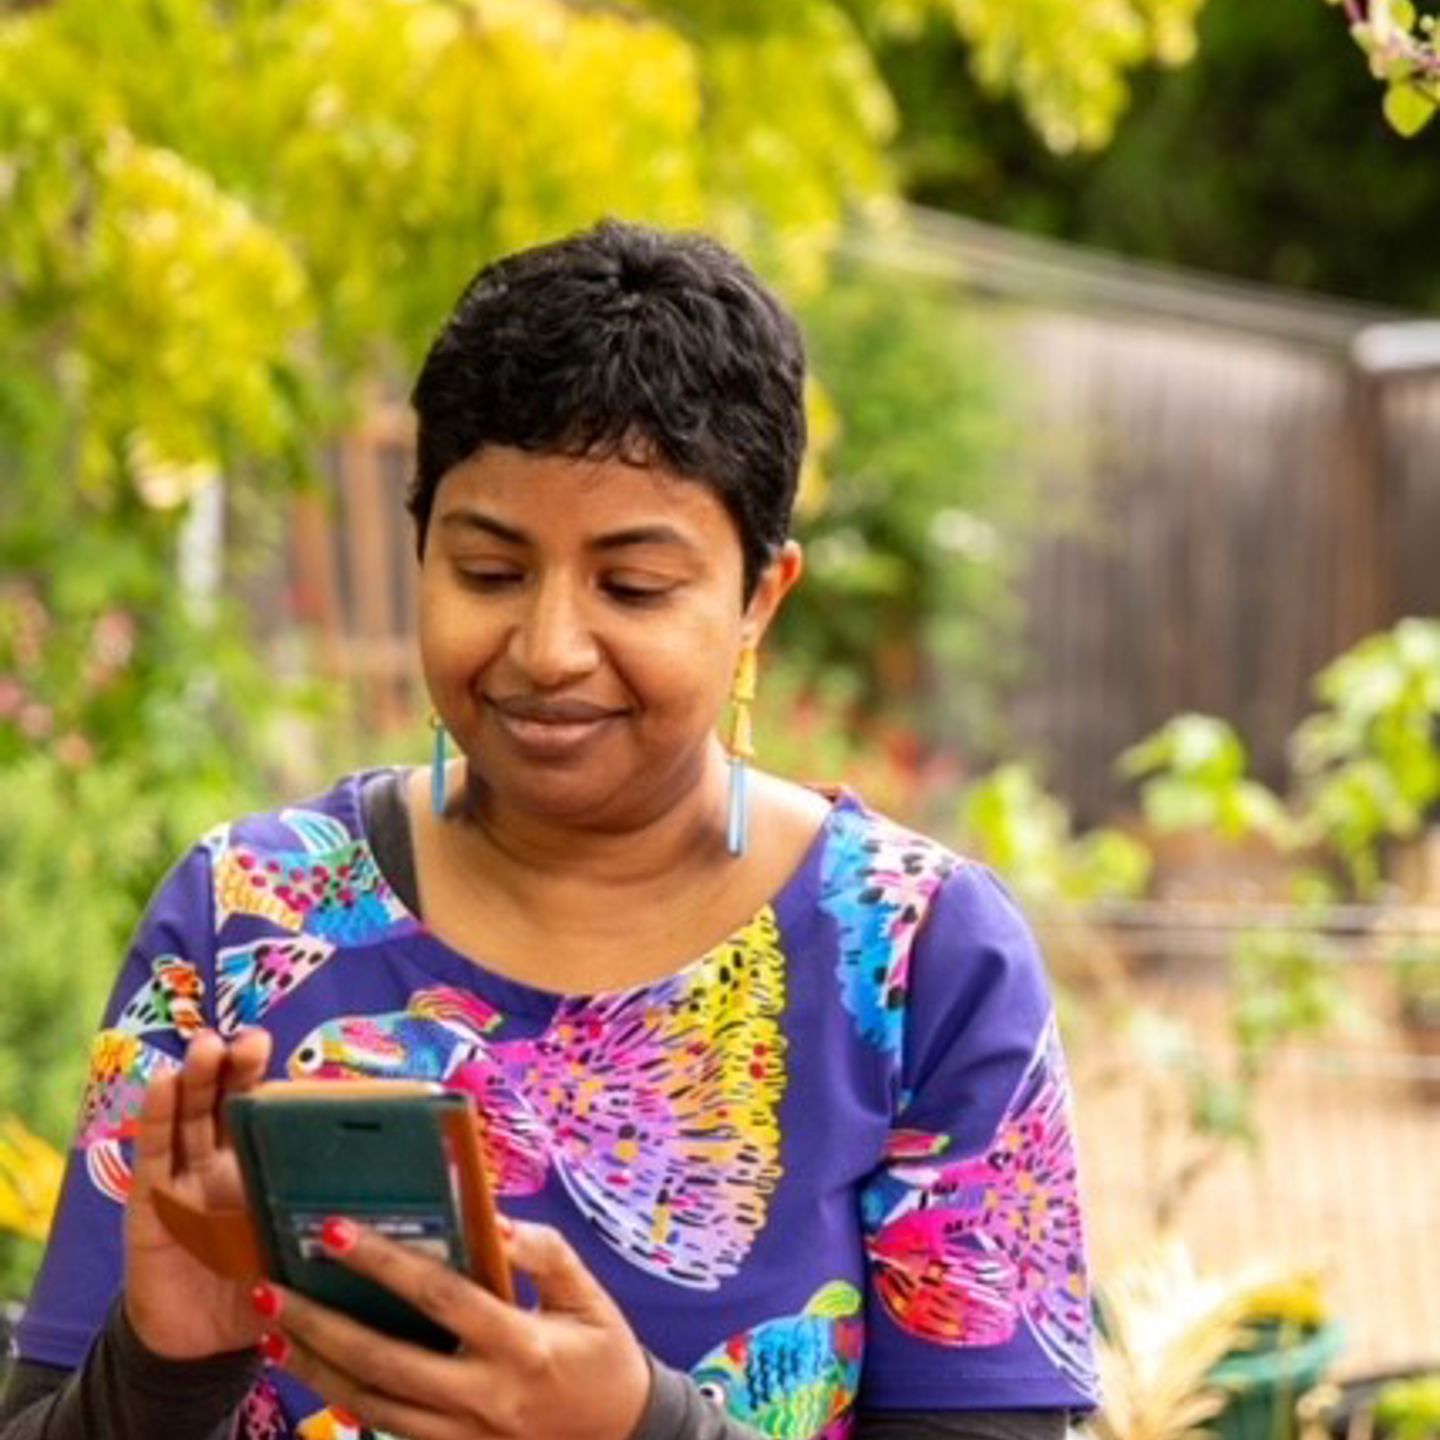 A woman is standing in a garden, looking at a mobile phone